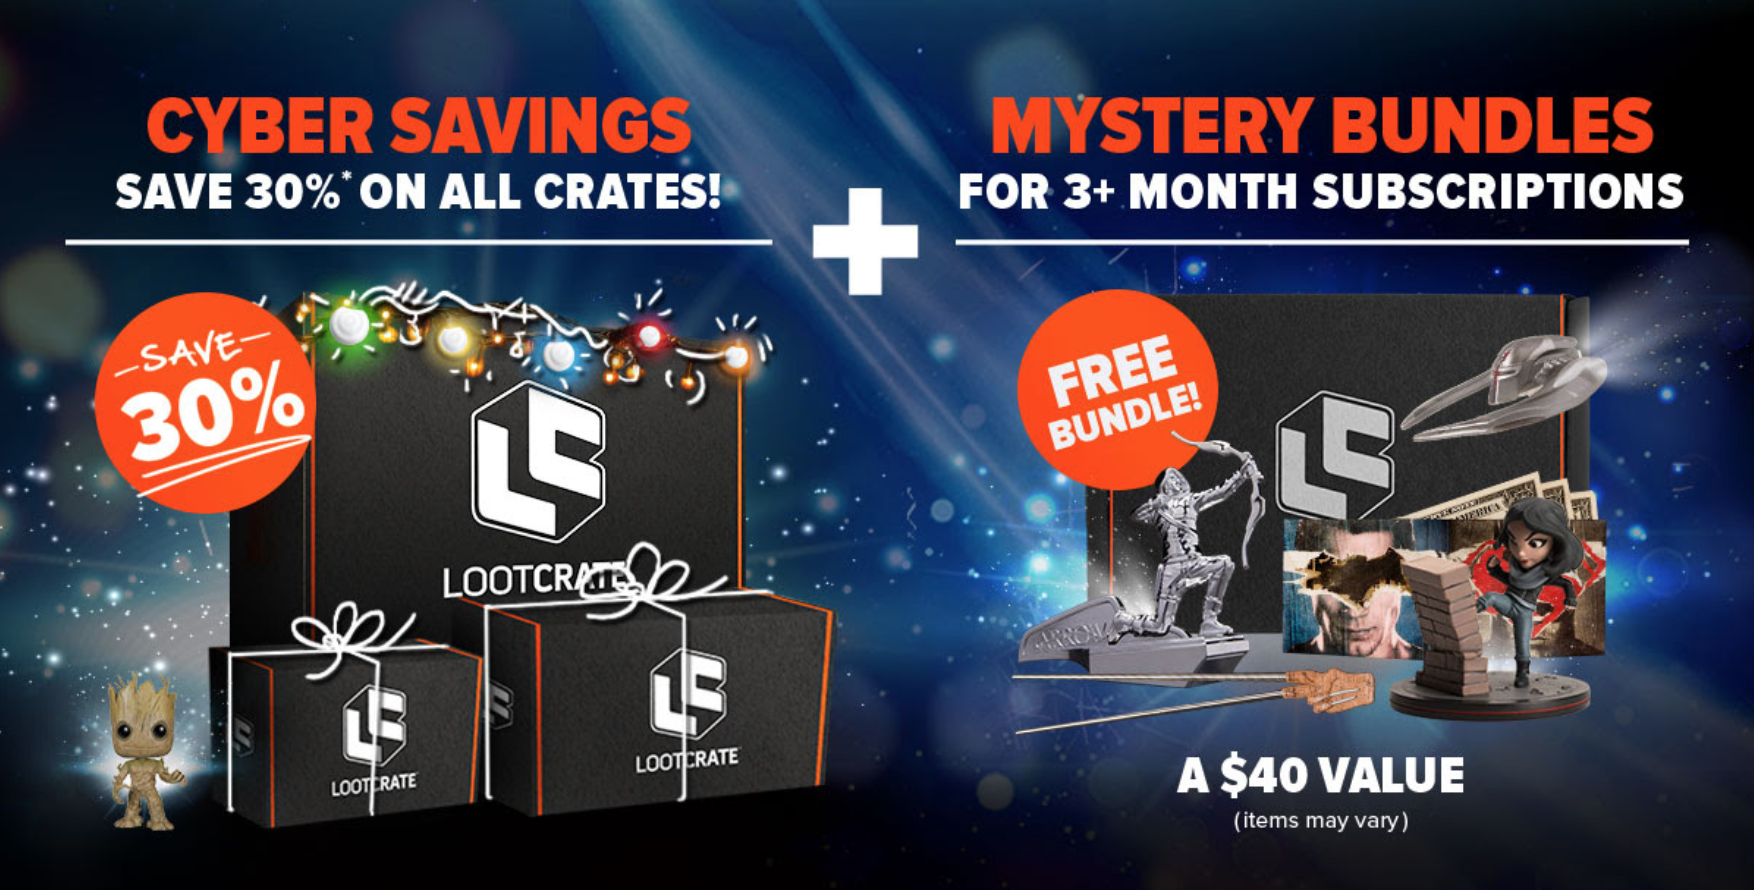 Loot Crate Cyber Monday Deal – 30% Off ALL Subscriptions + FREE Mystery Bundles!